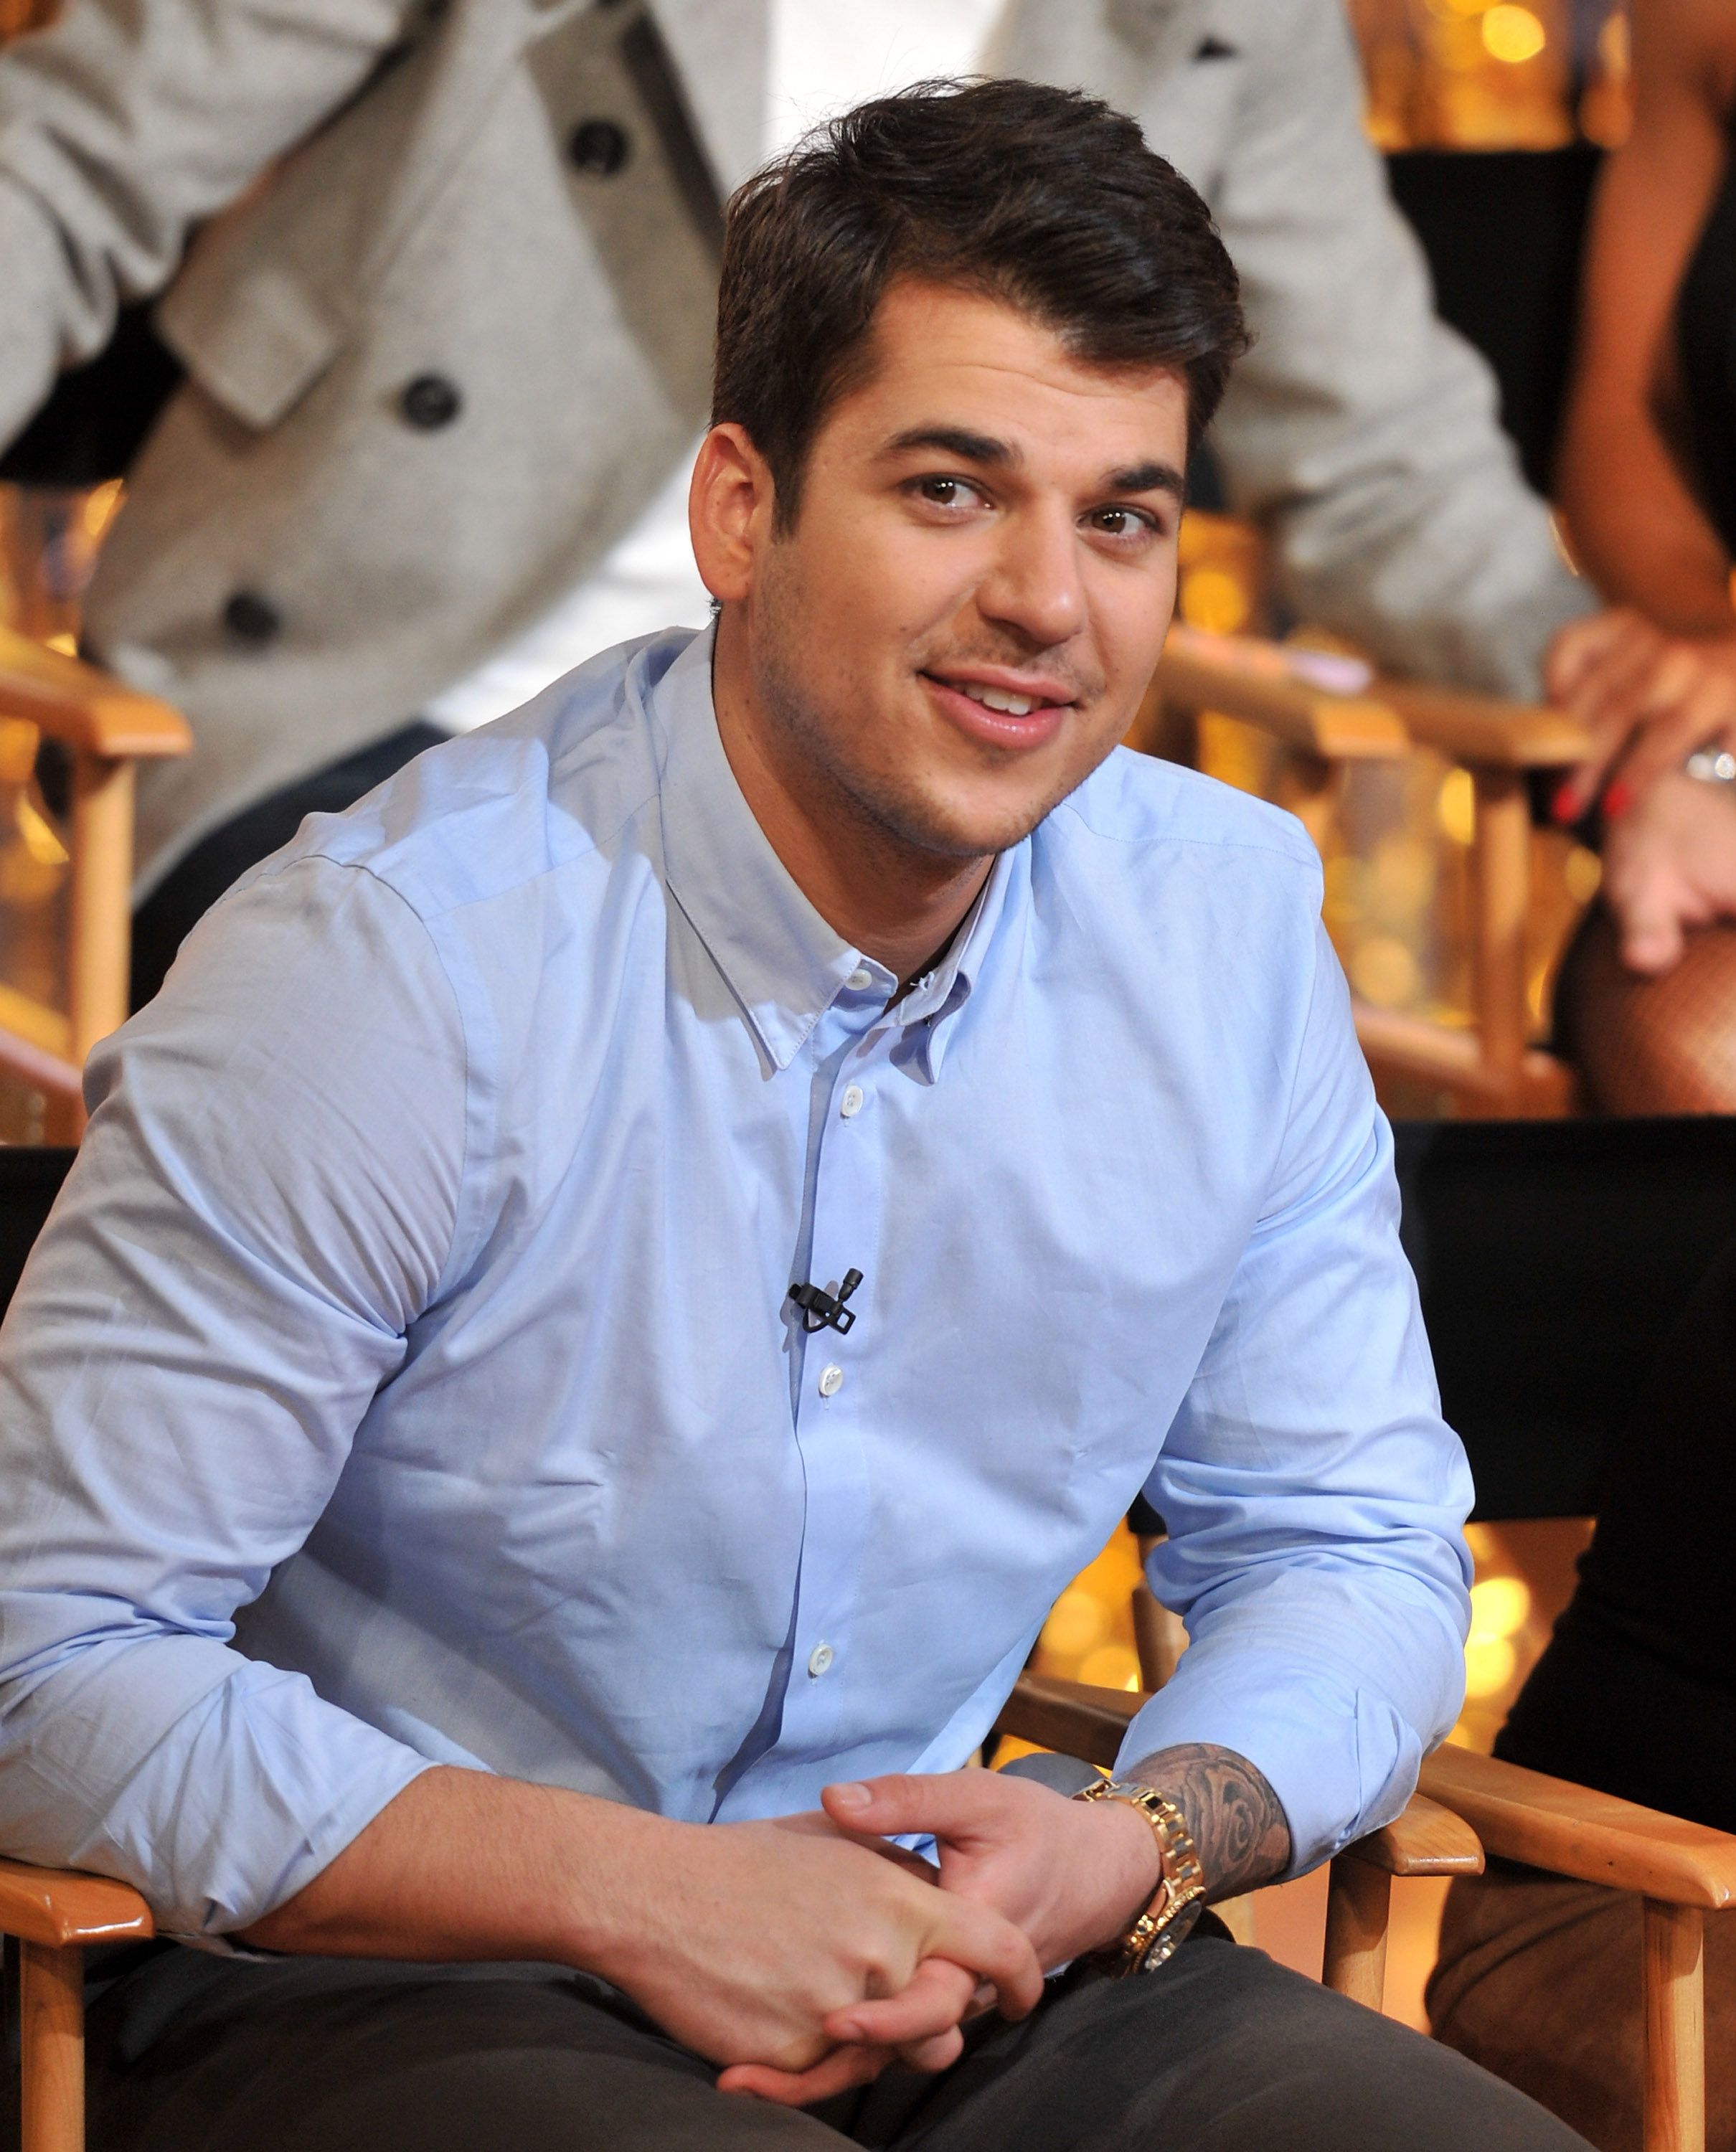 A photo of Rob Kardashian at an event | Photo: Getty Images